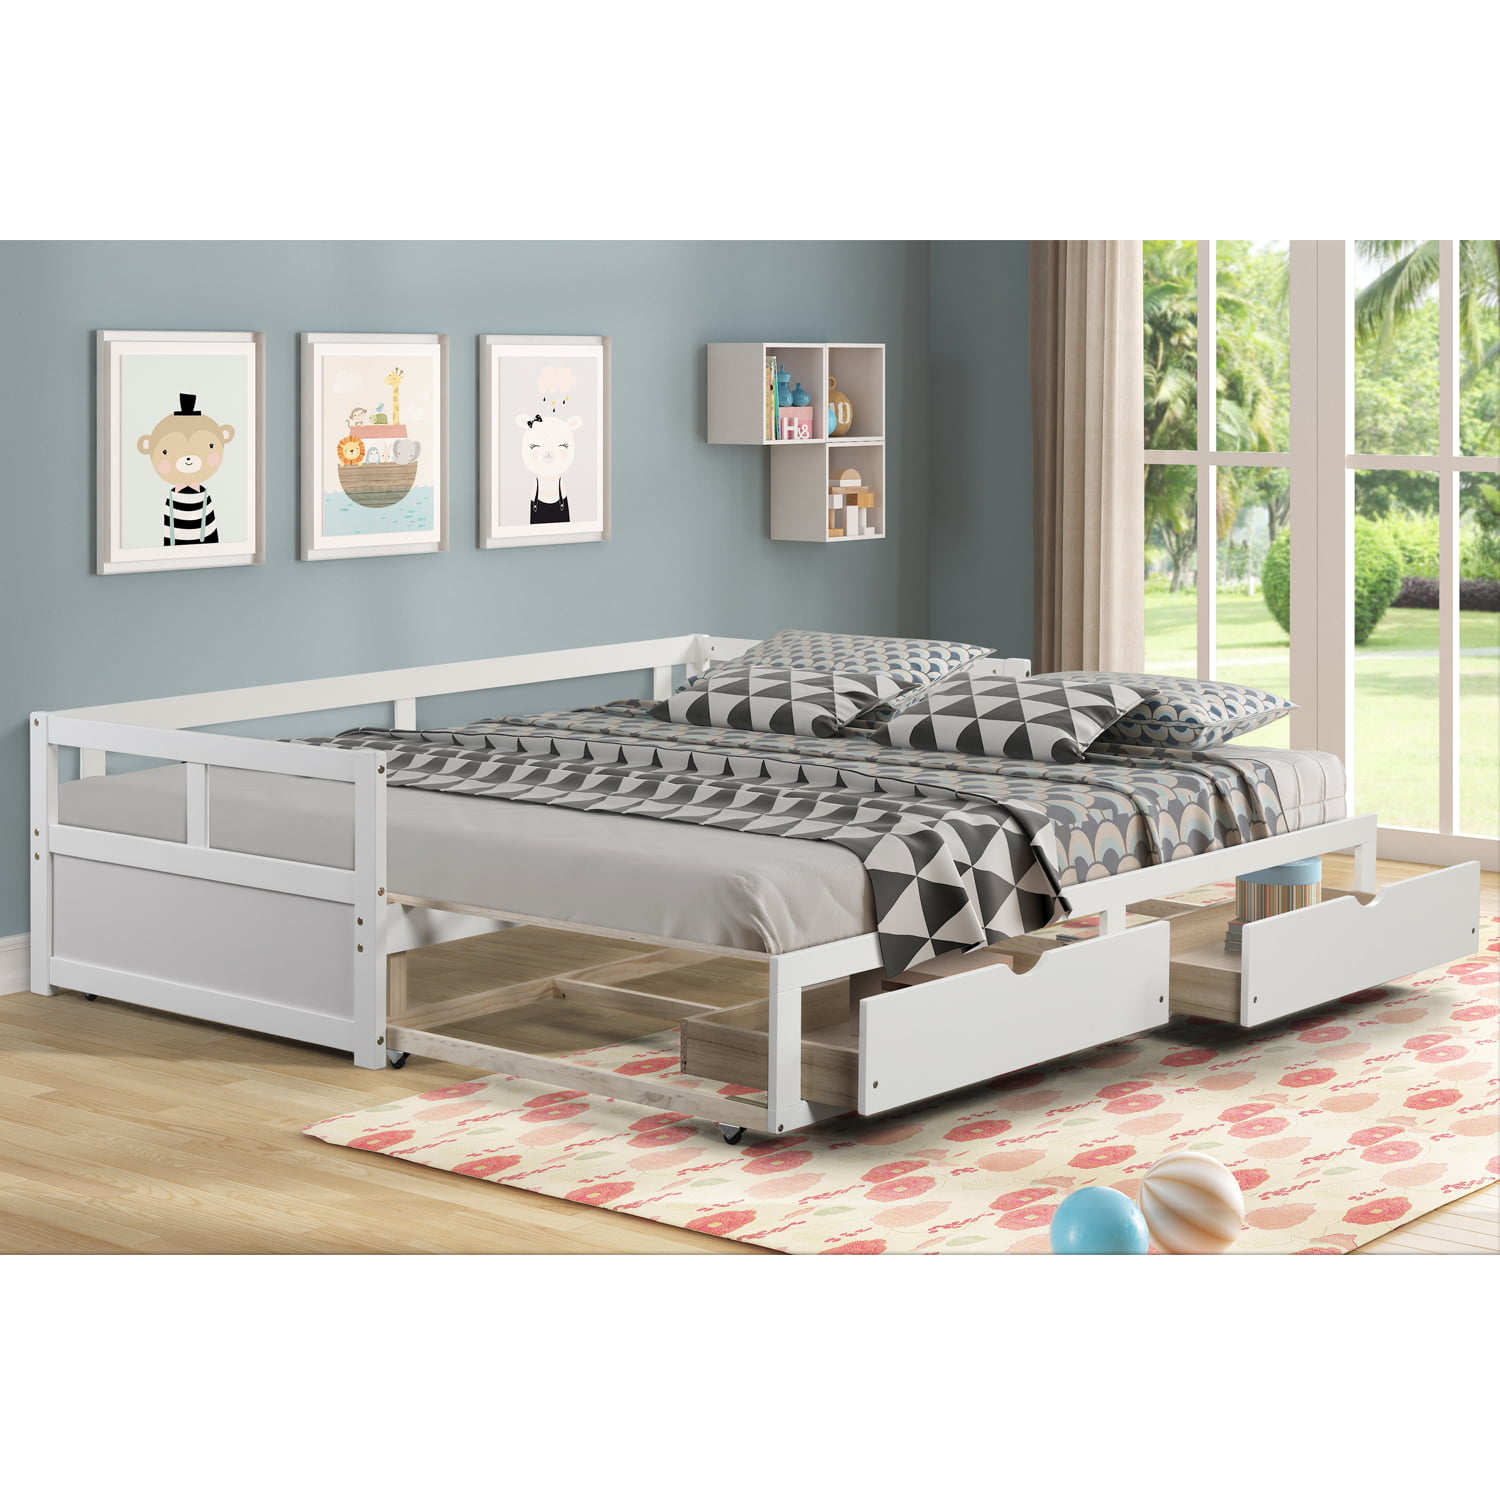 Storage Drawers Bed Frame With Slats, Wayfair Full Bed Frame With Storage